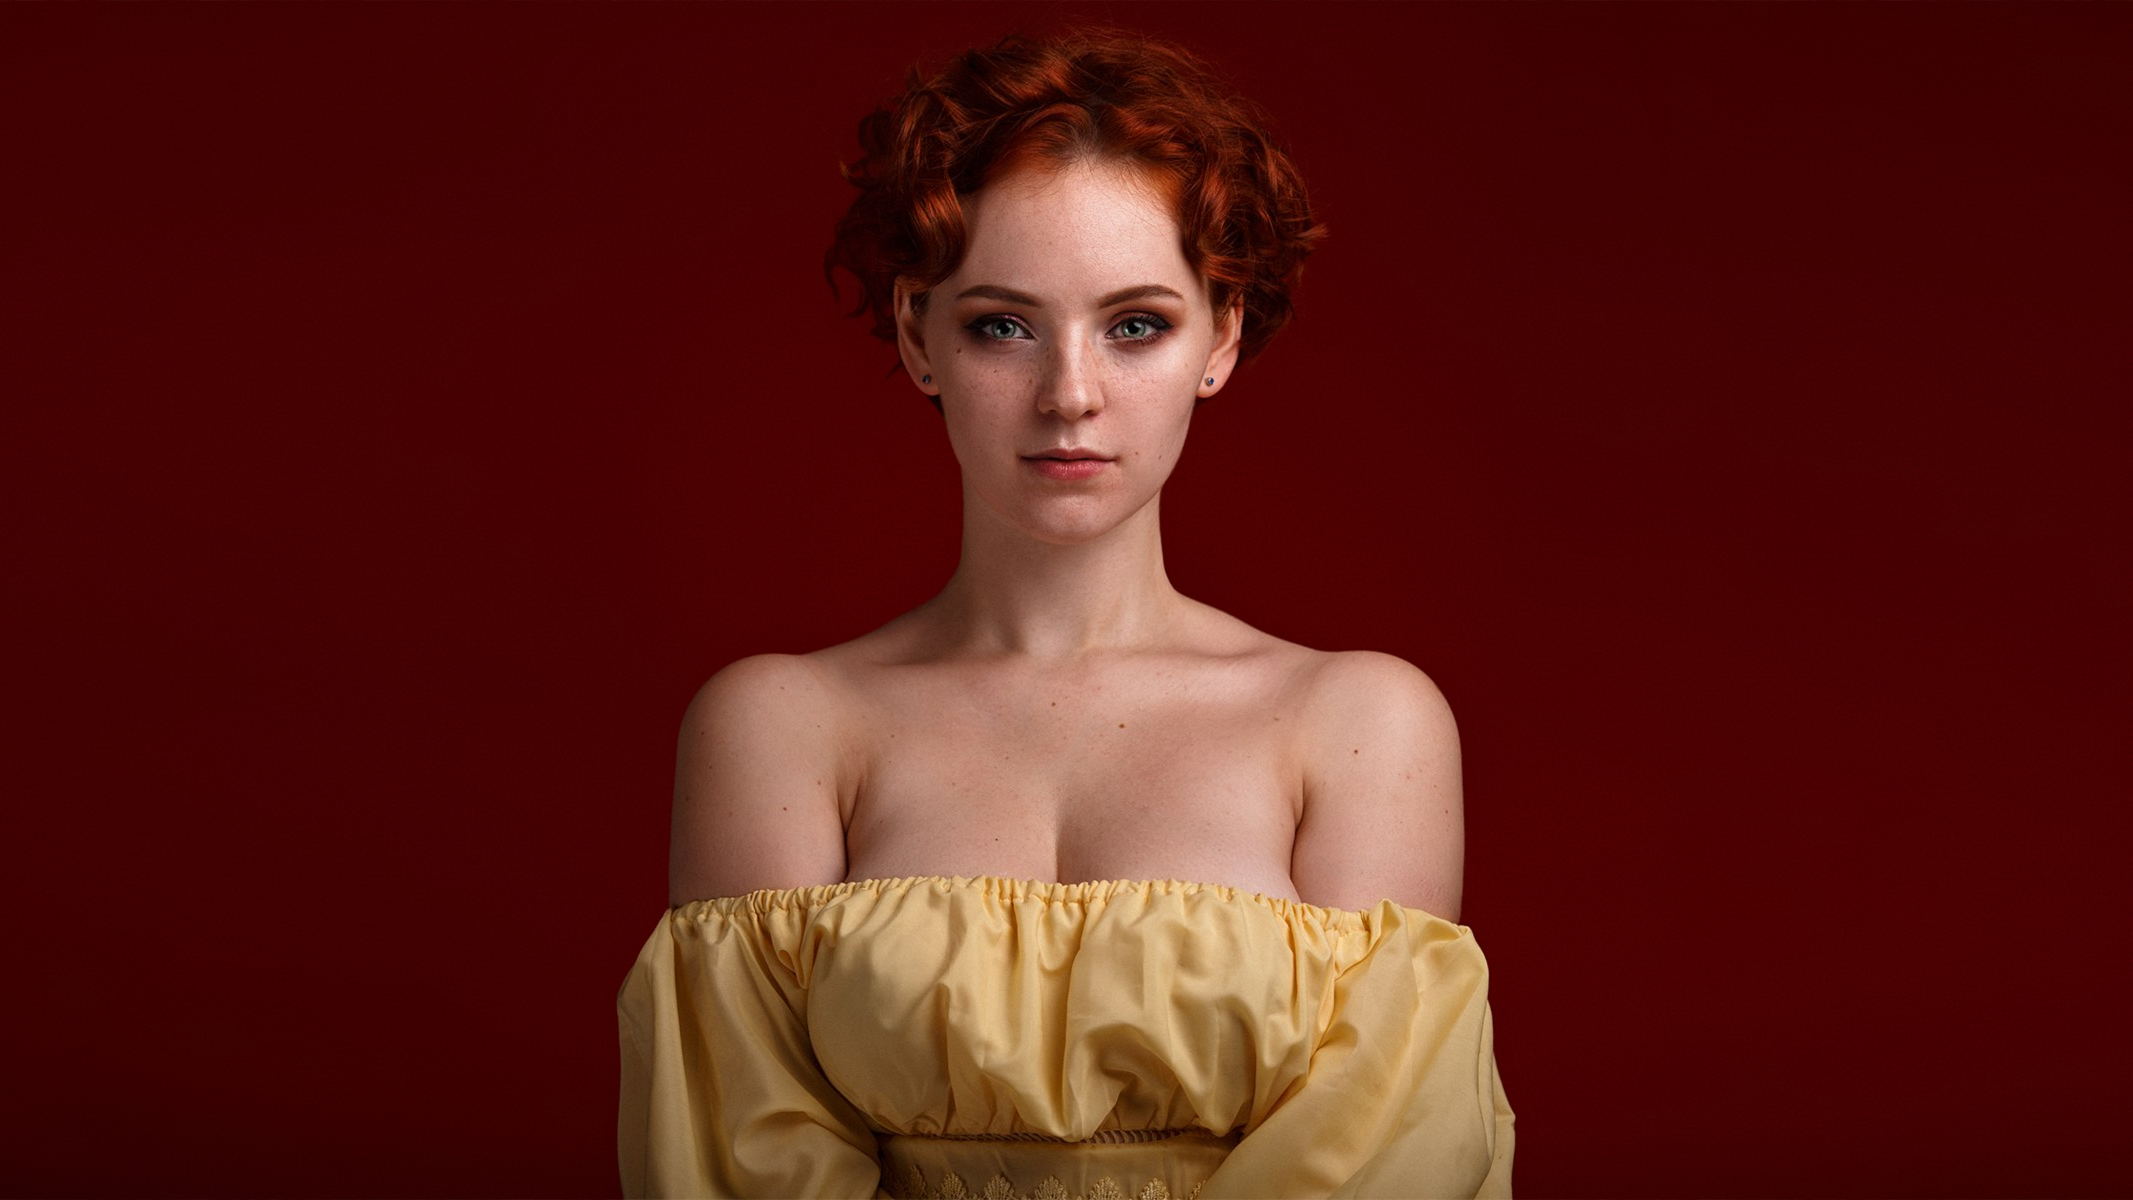 People 2133x1200 women model redhead short hair freckles looking at viewer portrait earring bare shoulders cleavage dress yellow dress red background simple background photography Alexandr Chuprina